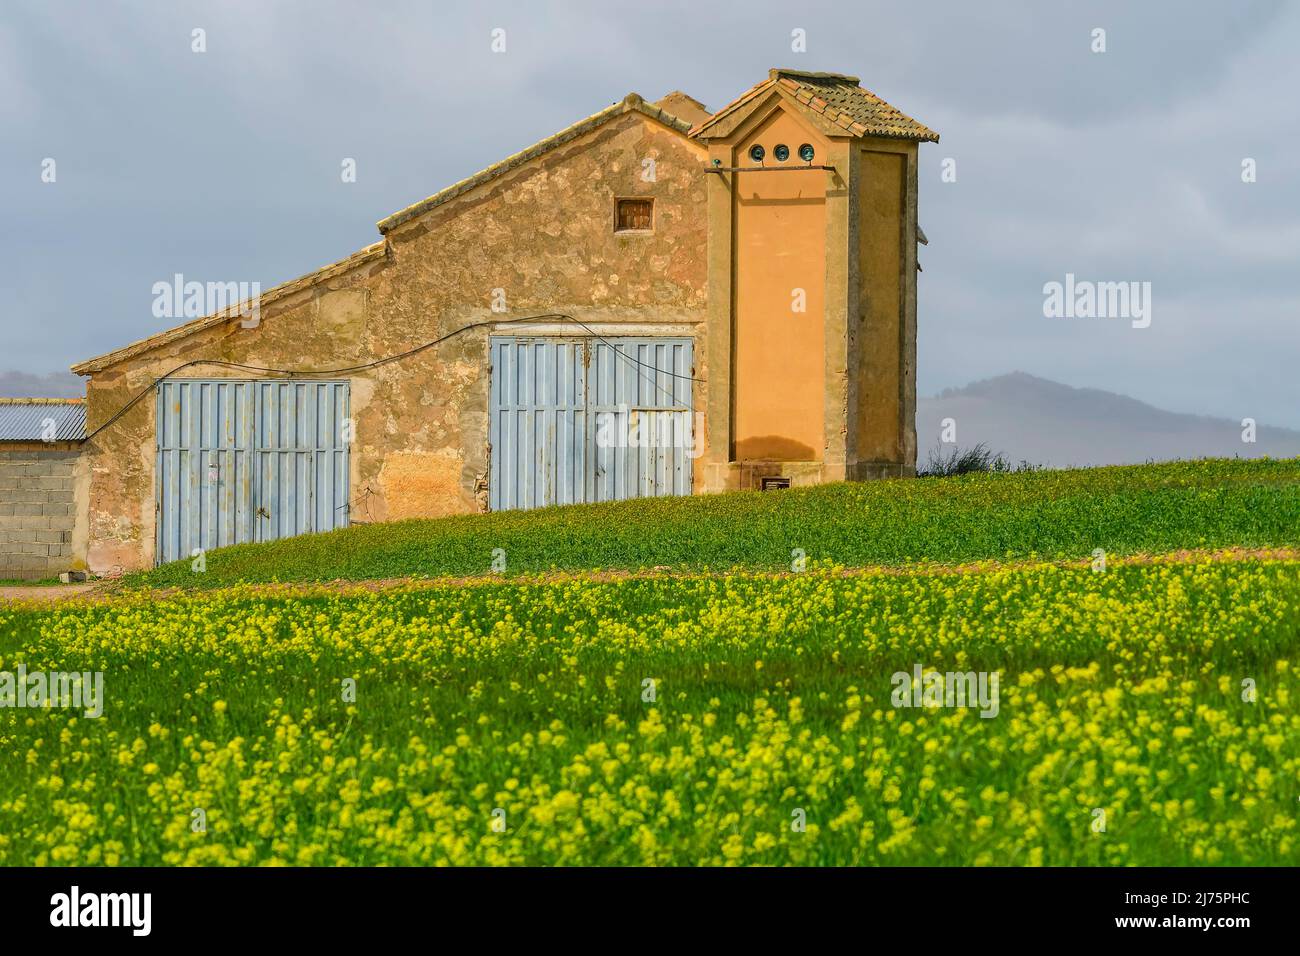 Cereal silo in the agricultural landscape Stock Photo